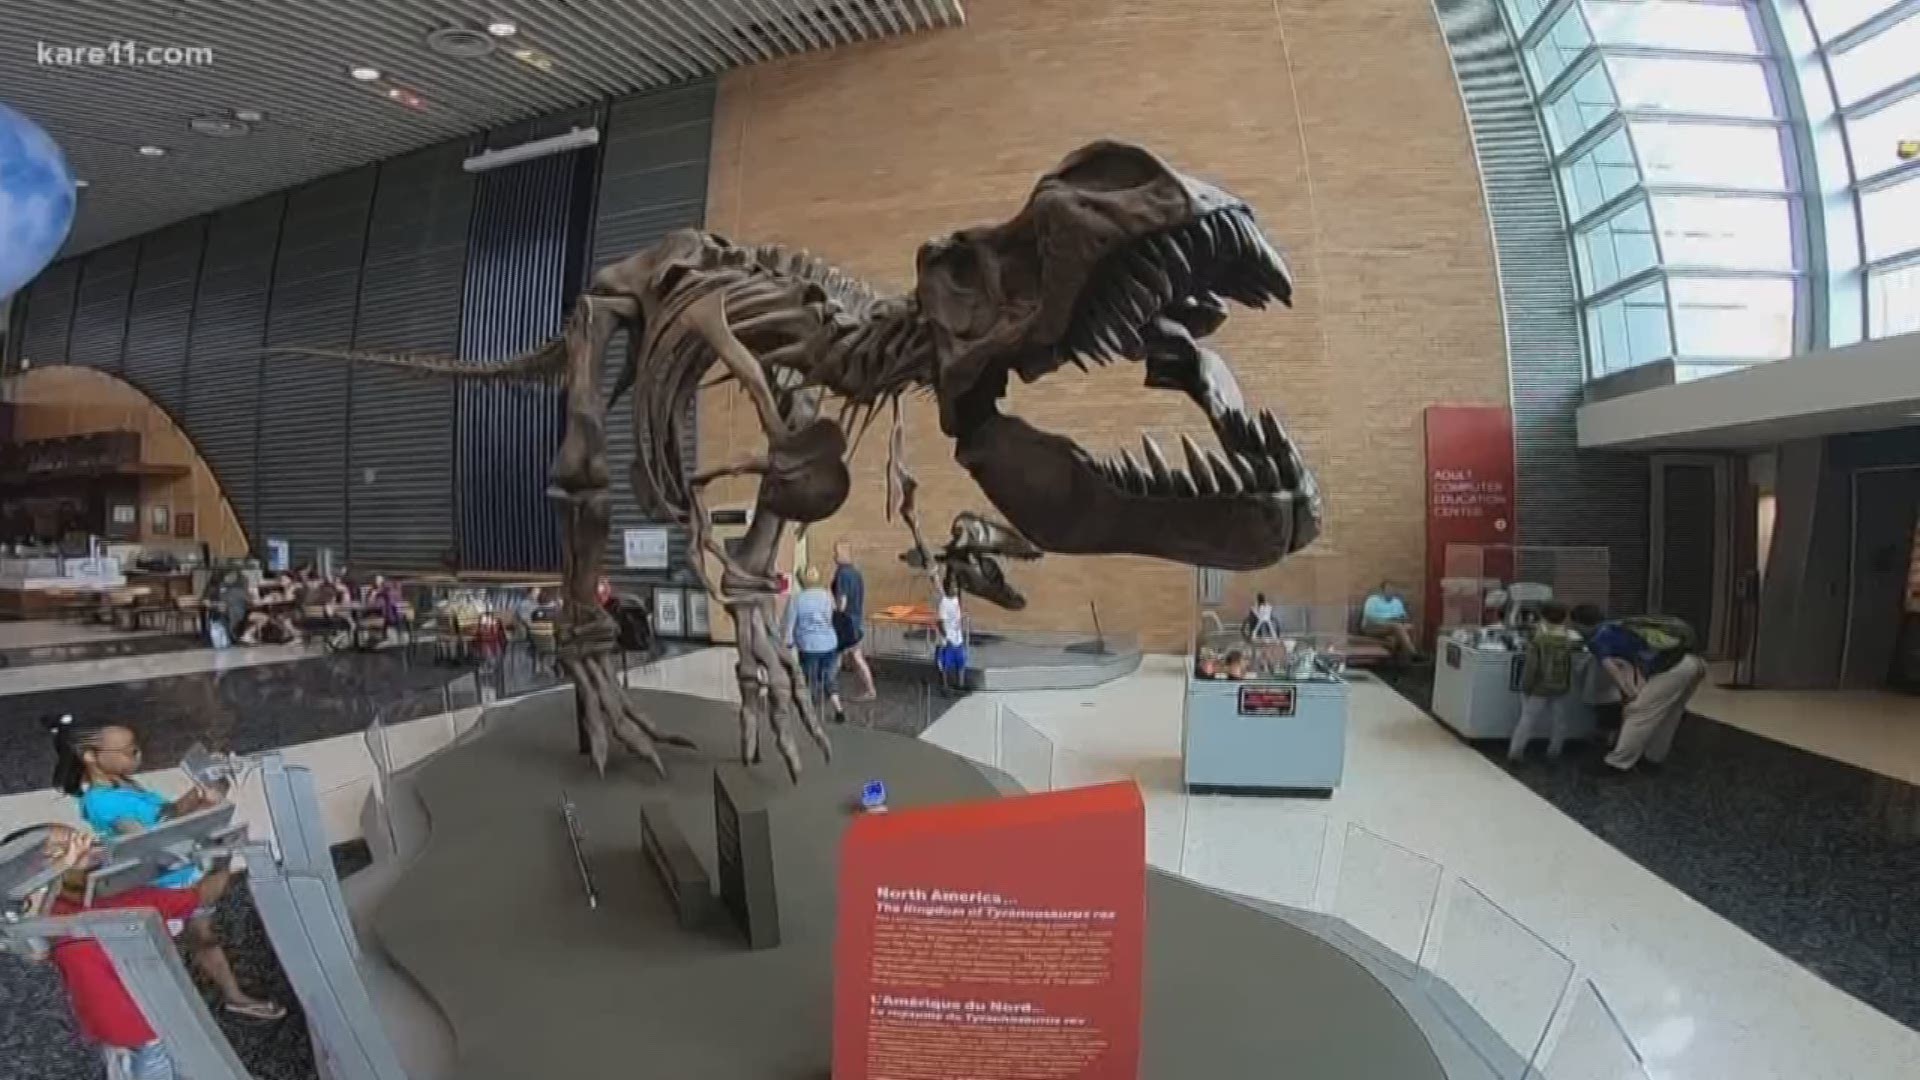 The Science Museum is getting ready to kick off a new summer tradition: Dino Fest.